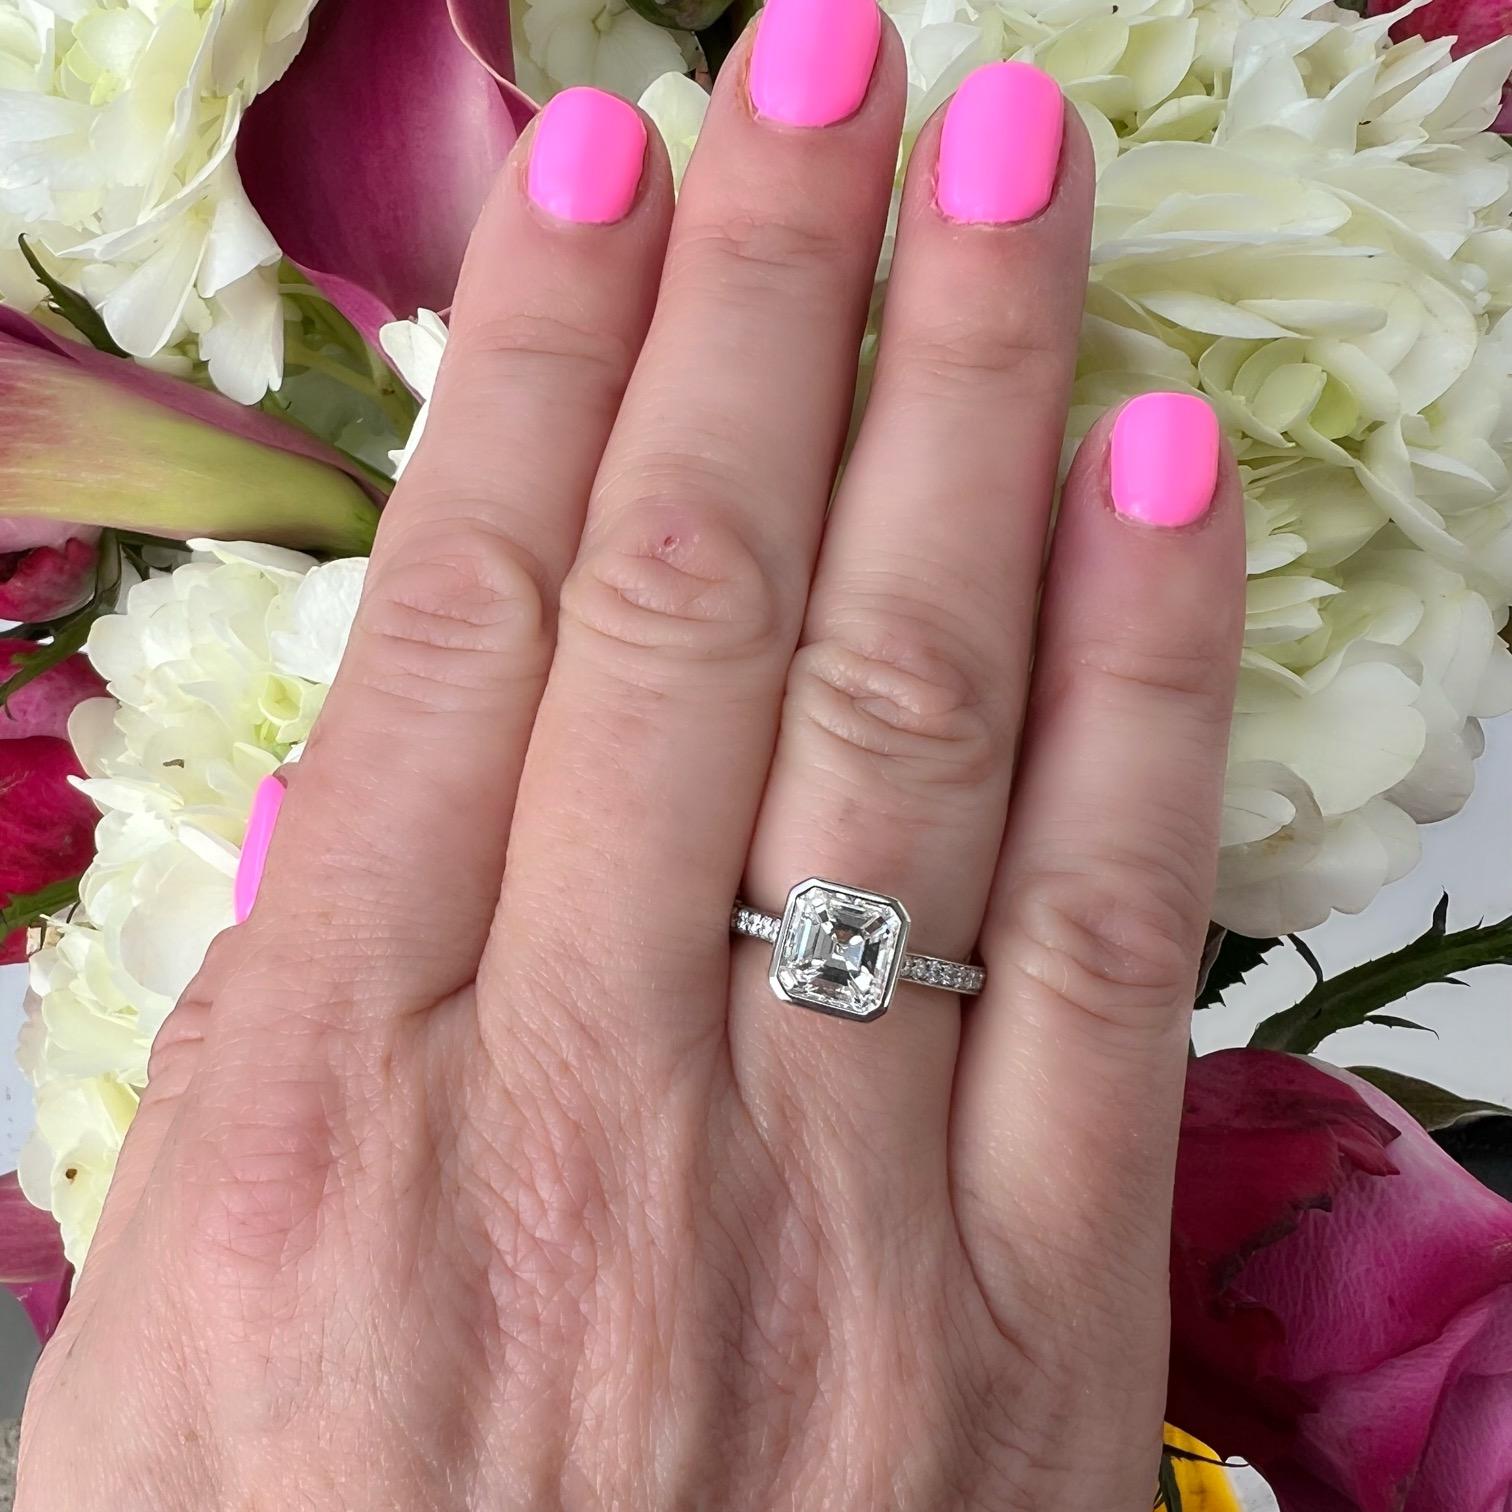 Get ready to turn some heads with this platinum beauty! This incredible custom engagement rings features a gorgeous 2.14 carat Asscher Cut Diamond (aka Square Emerald Cut) bezel set in a phenomenal platinum ring with an open basket showcasing every